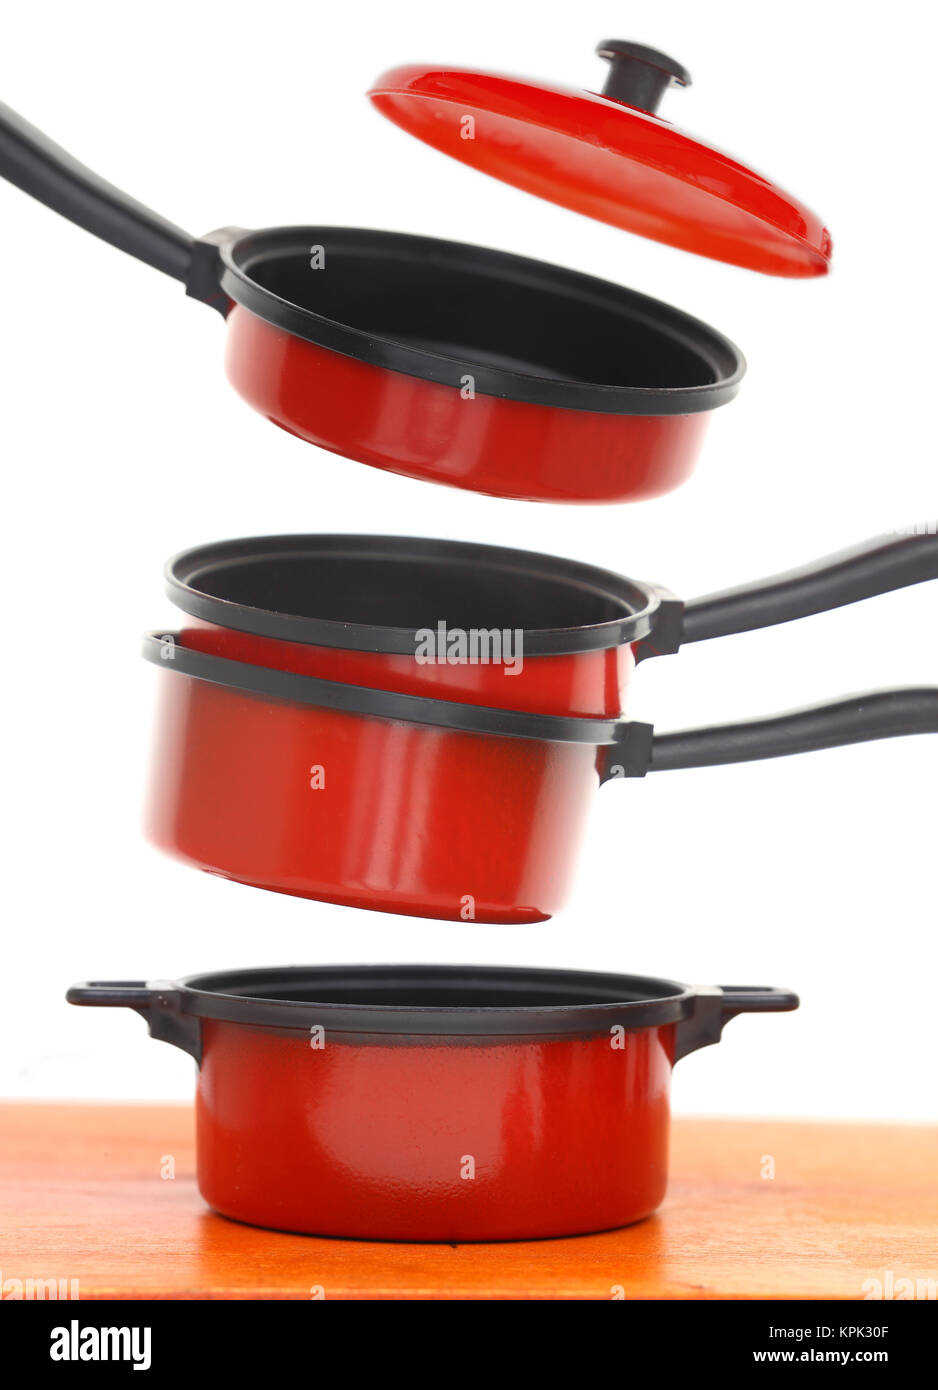 Red cookware set on white background Stock Photo